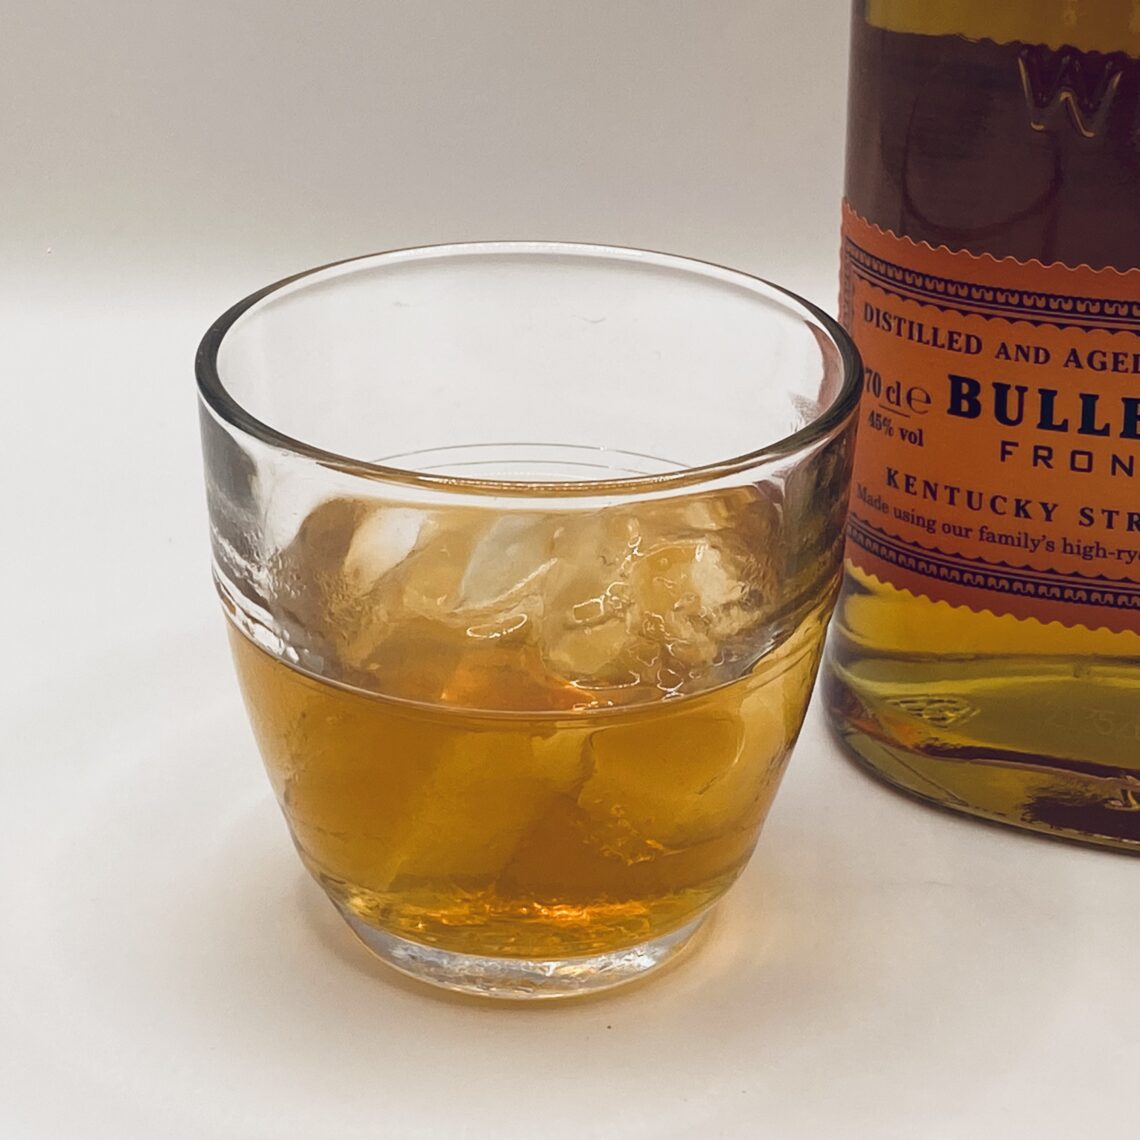 Bulleit Old Fashioned Cocktail | Vodka Guy's website